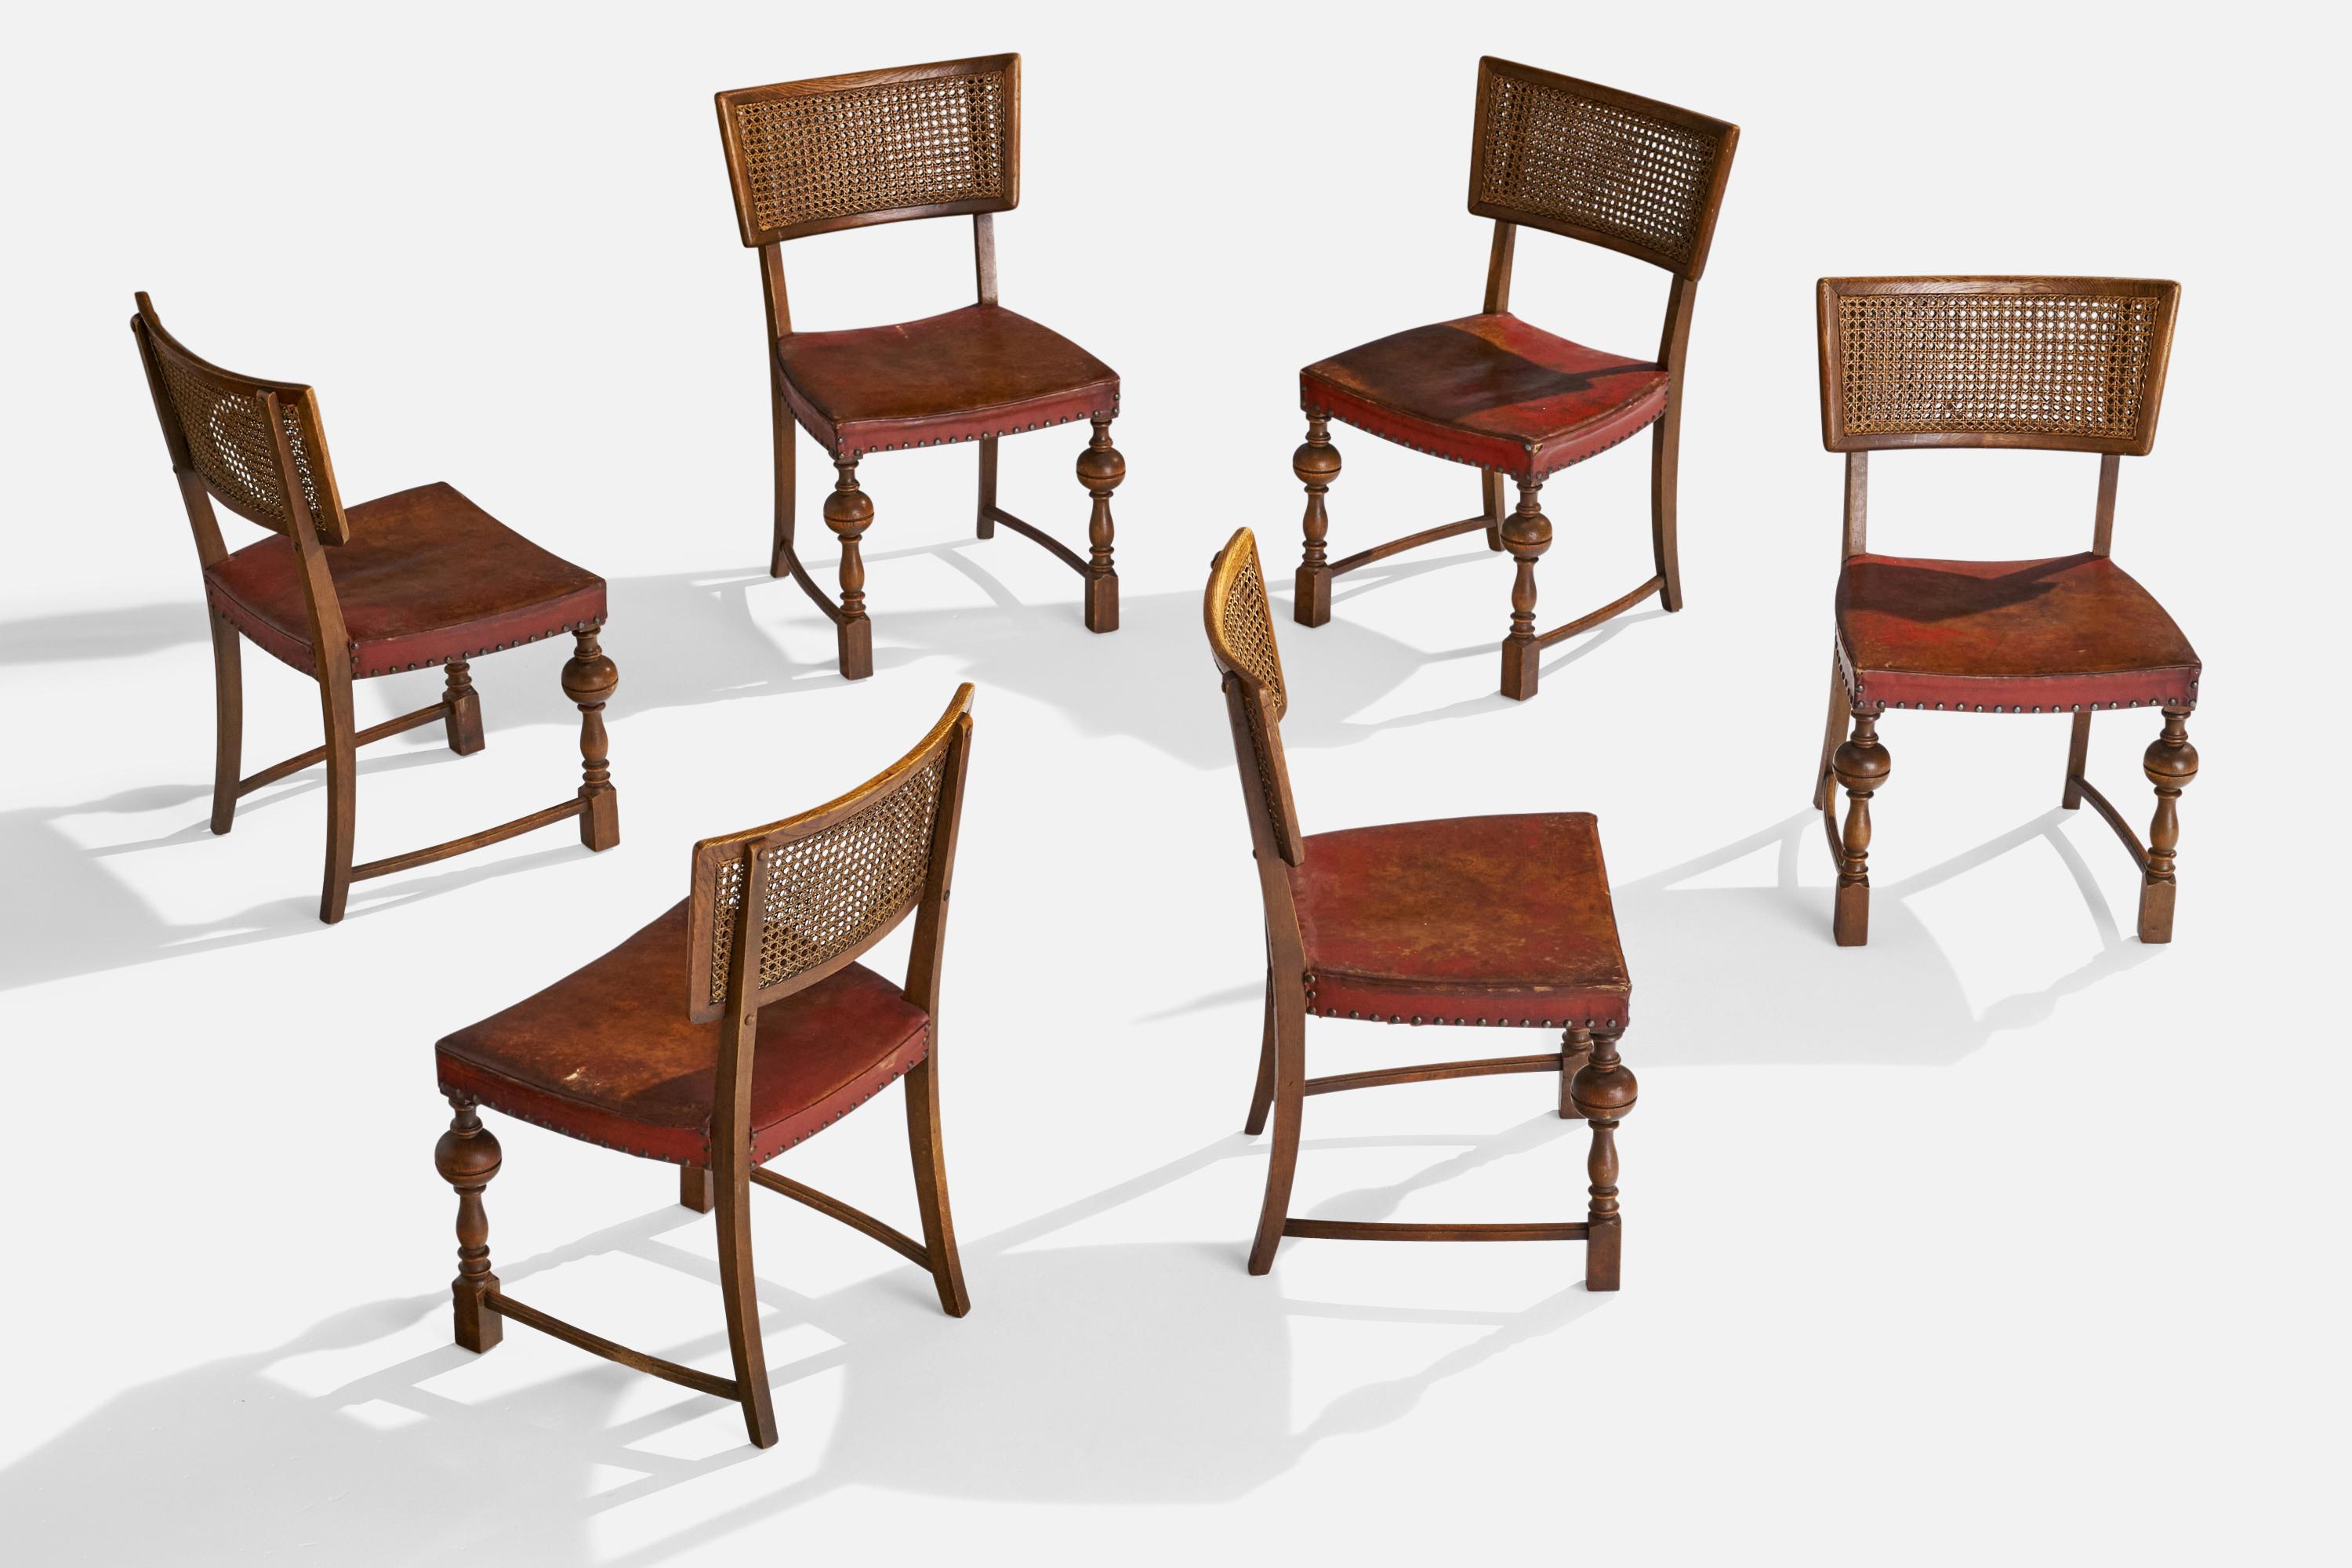 A set of 6 oak, cane and red leather side or dining chairs designed and produced in Denmark, 1930s.

Seat height: 16.75”